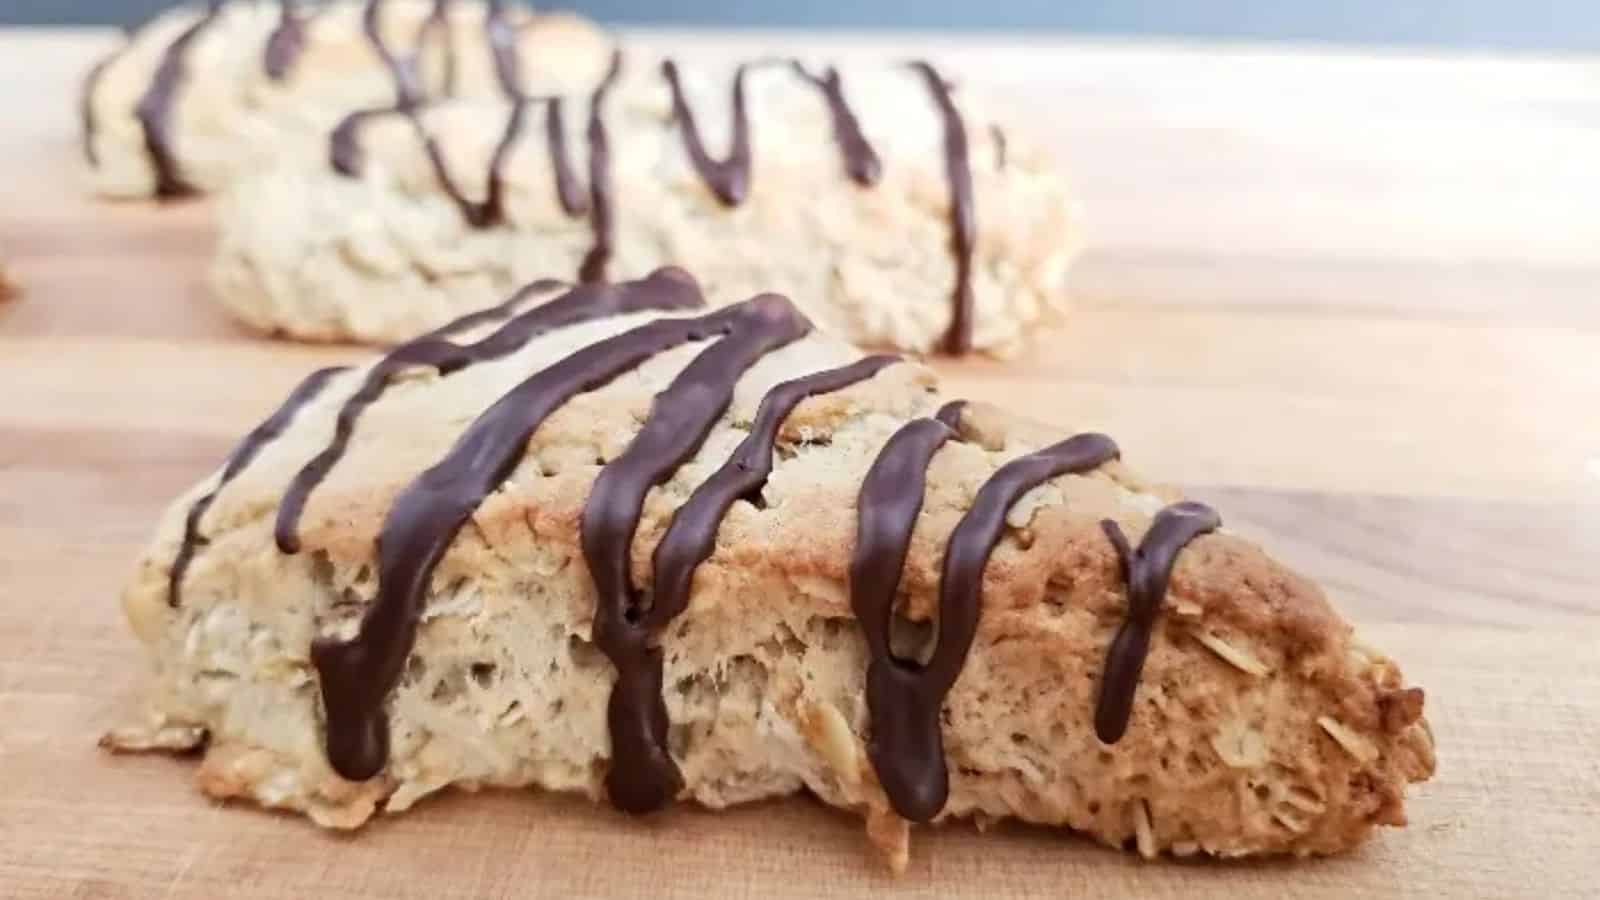 Image shows Chocolate drizzled mocha scones on a cutting board.